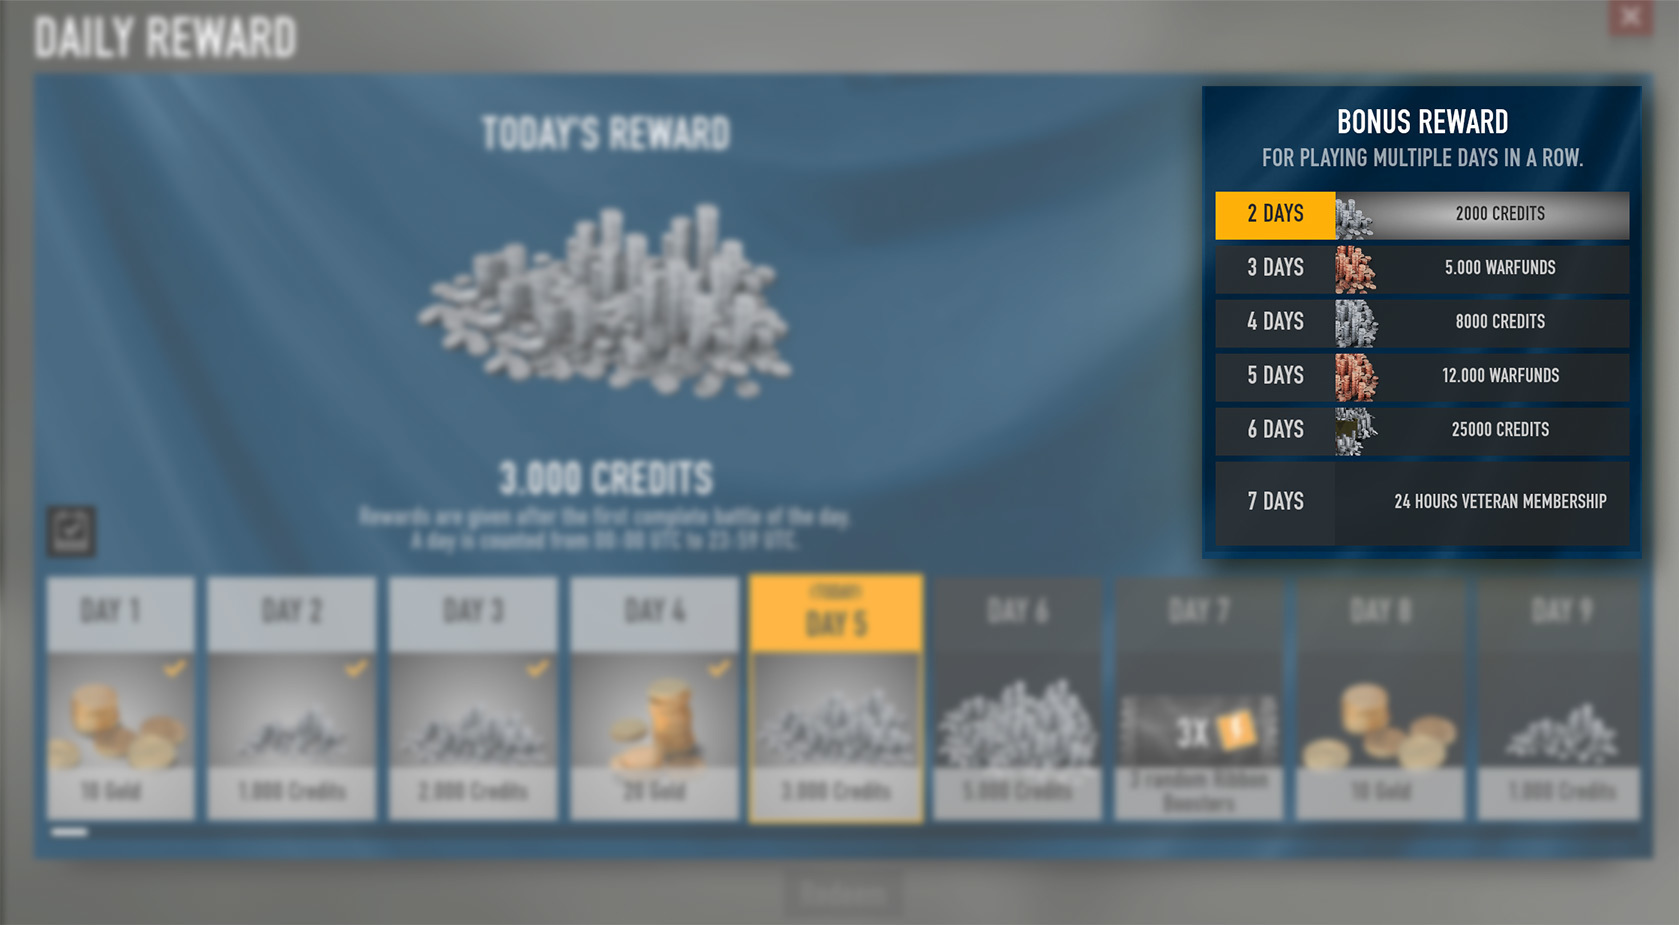 Payday 3 gonna sweep this, no contest. : r/paydaytheheist